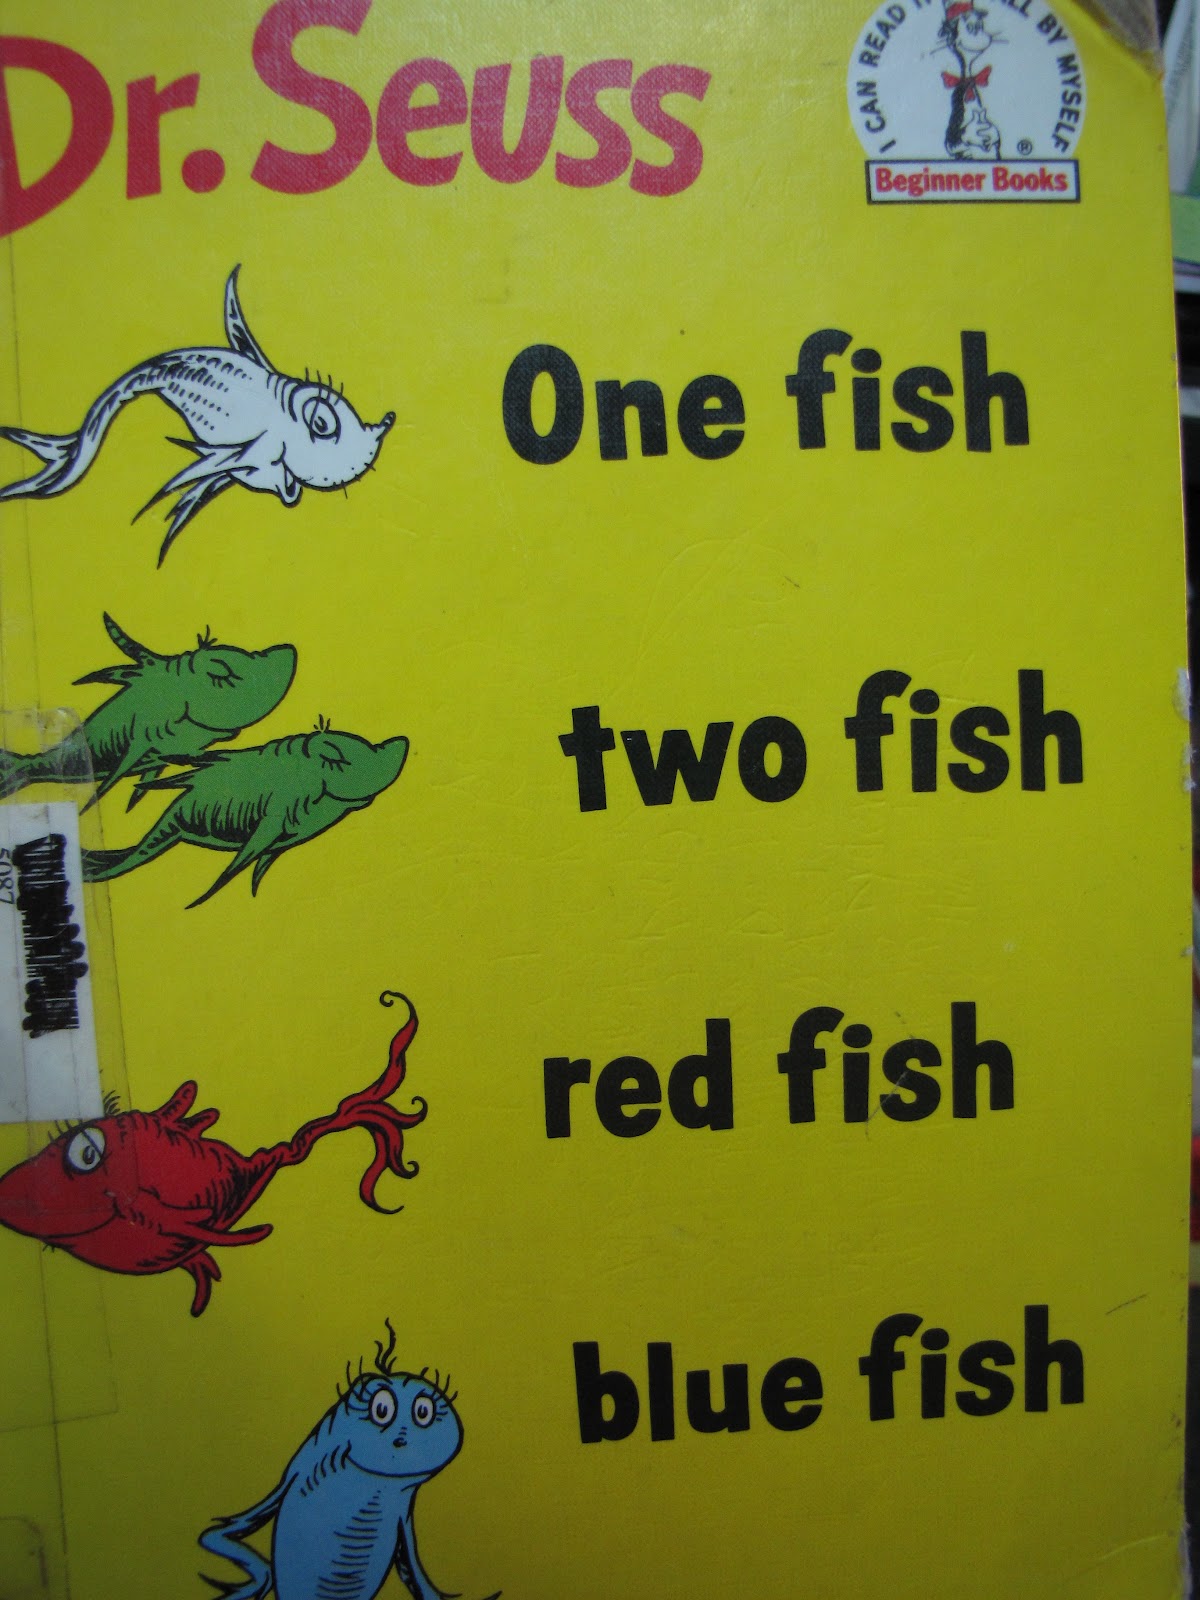 clip art one fish two fish - photo #31